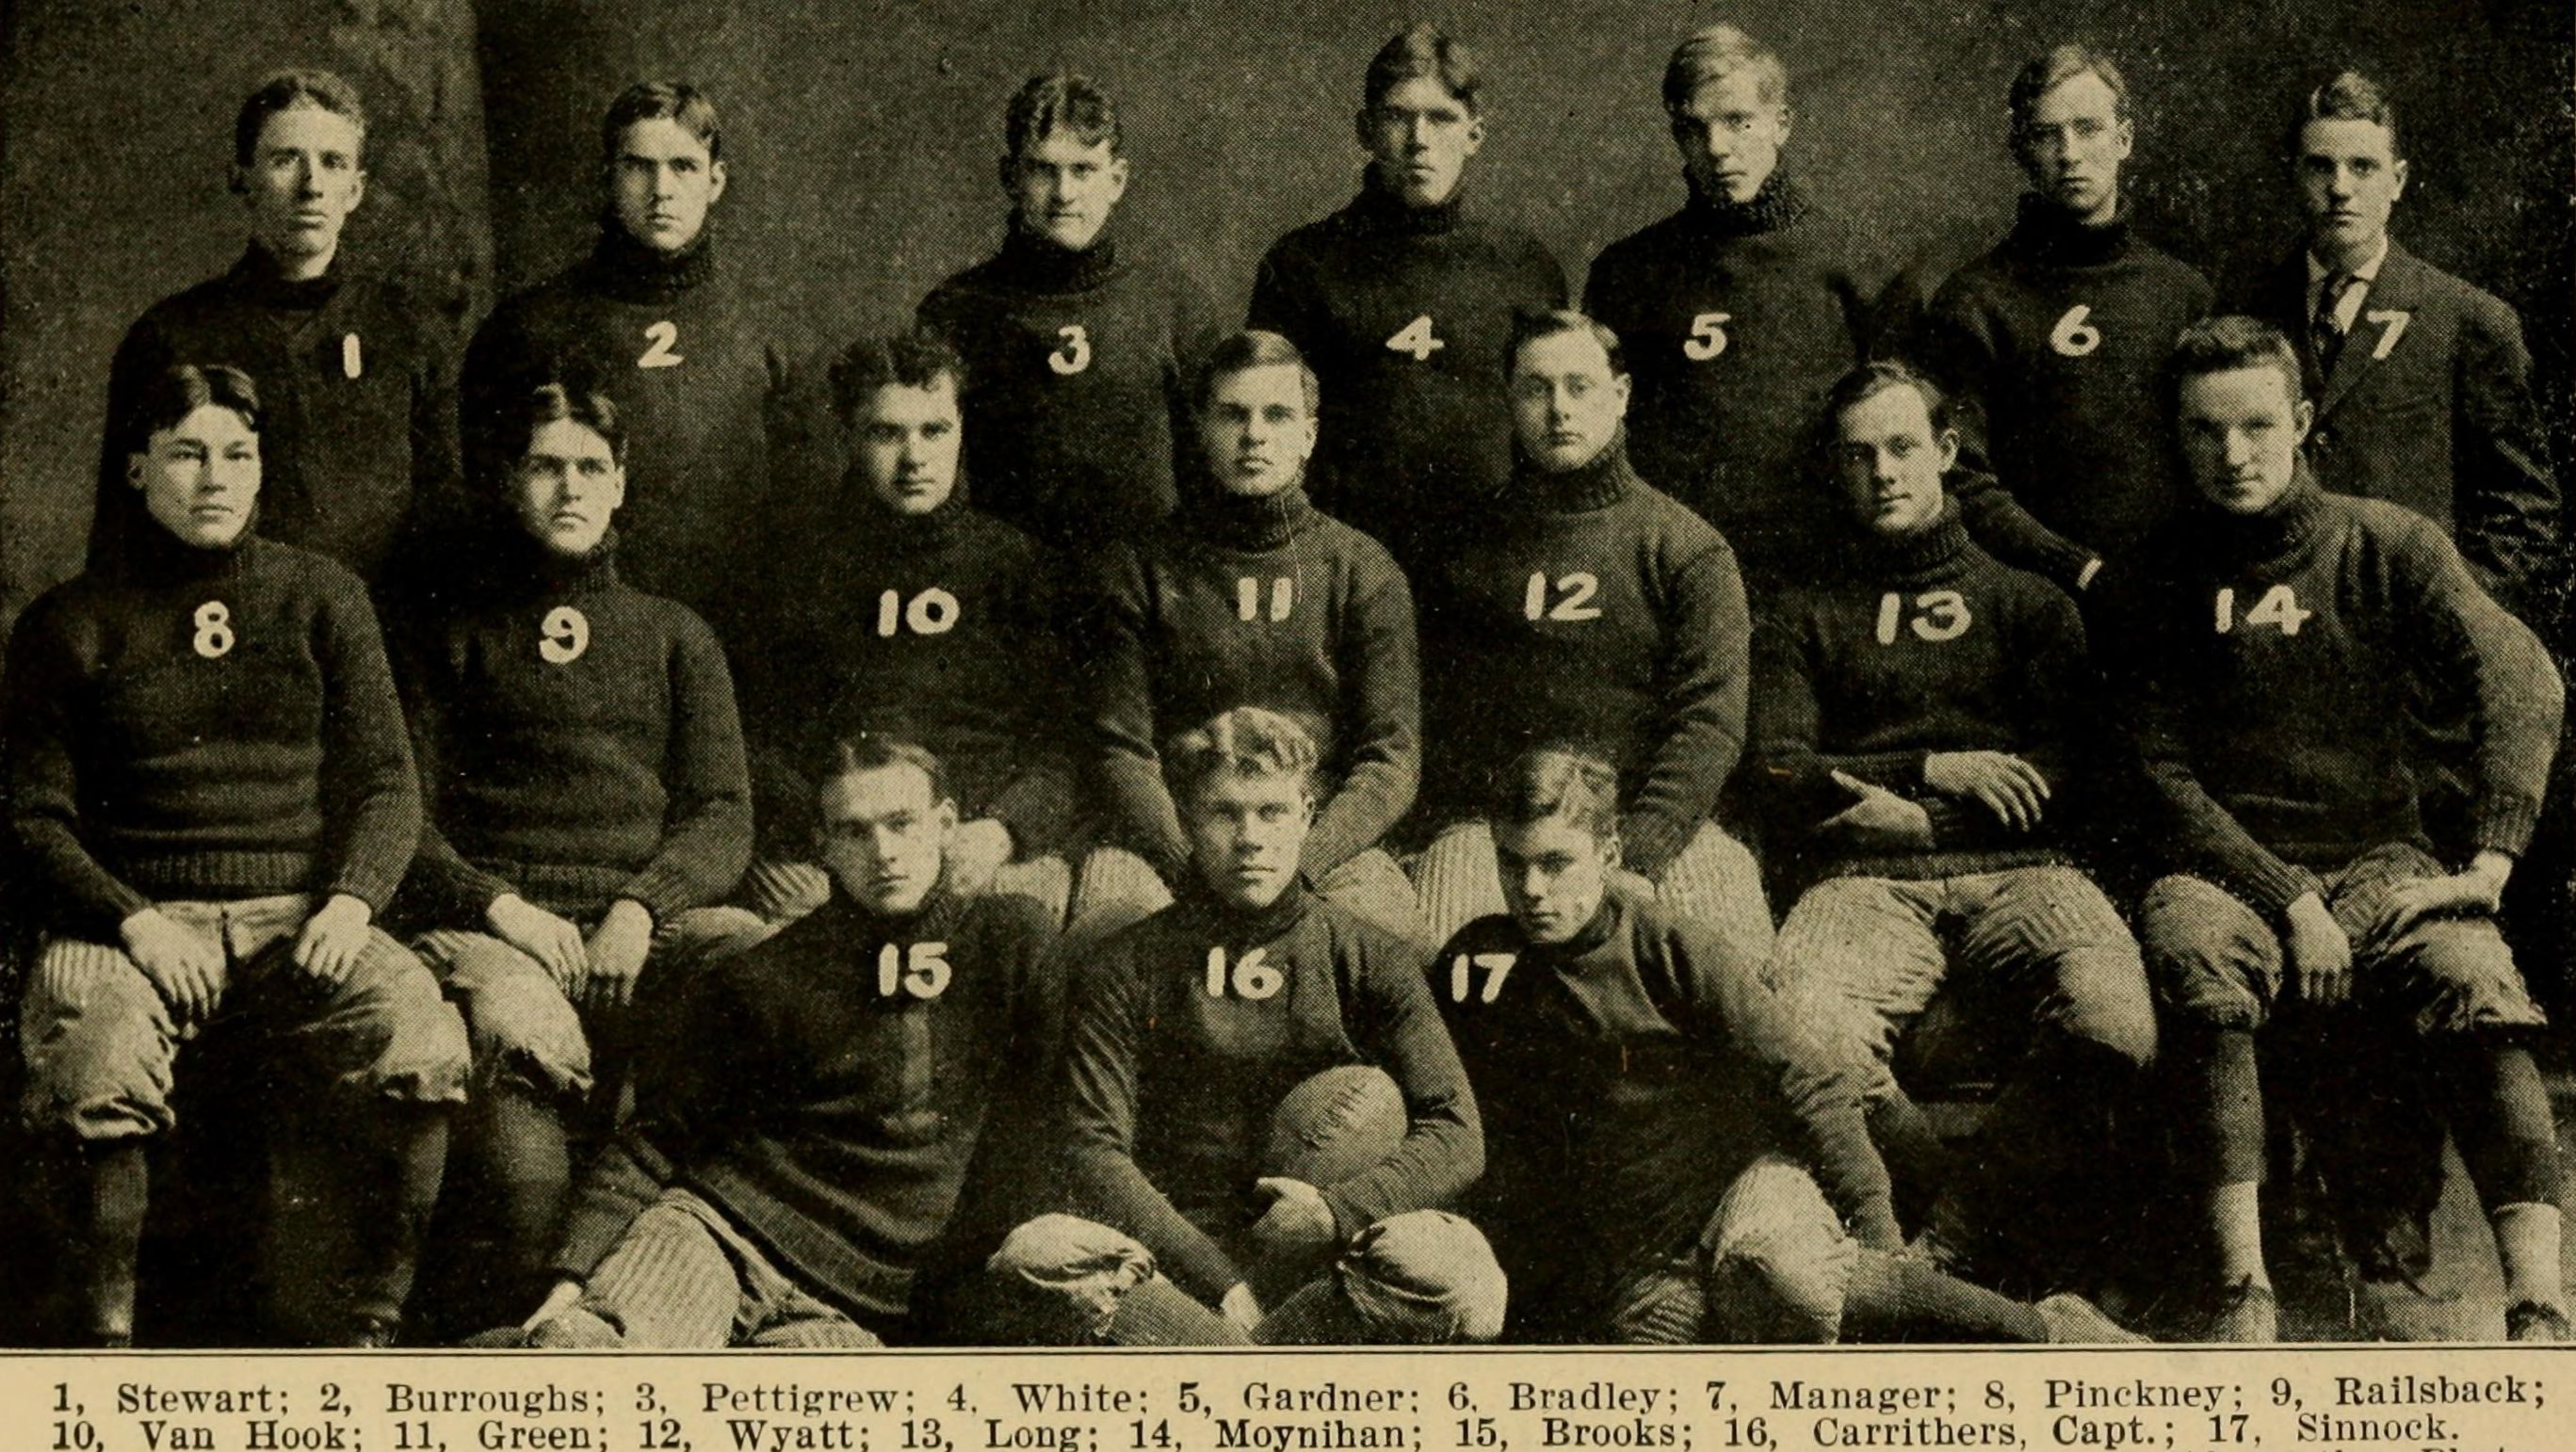 In 1907 the newly formed NCAA published its first rule book for football, which included a portrait of the University of Illinois football team.